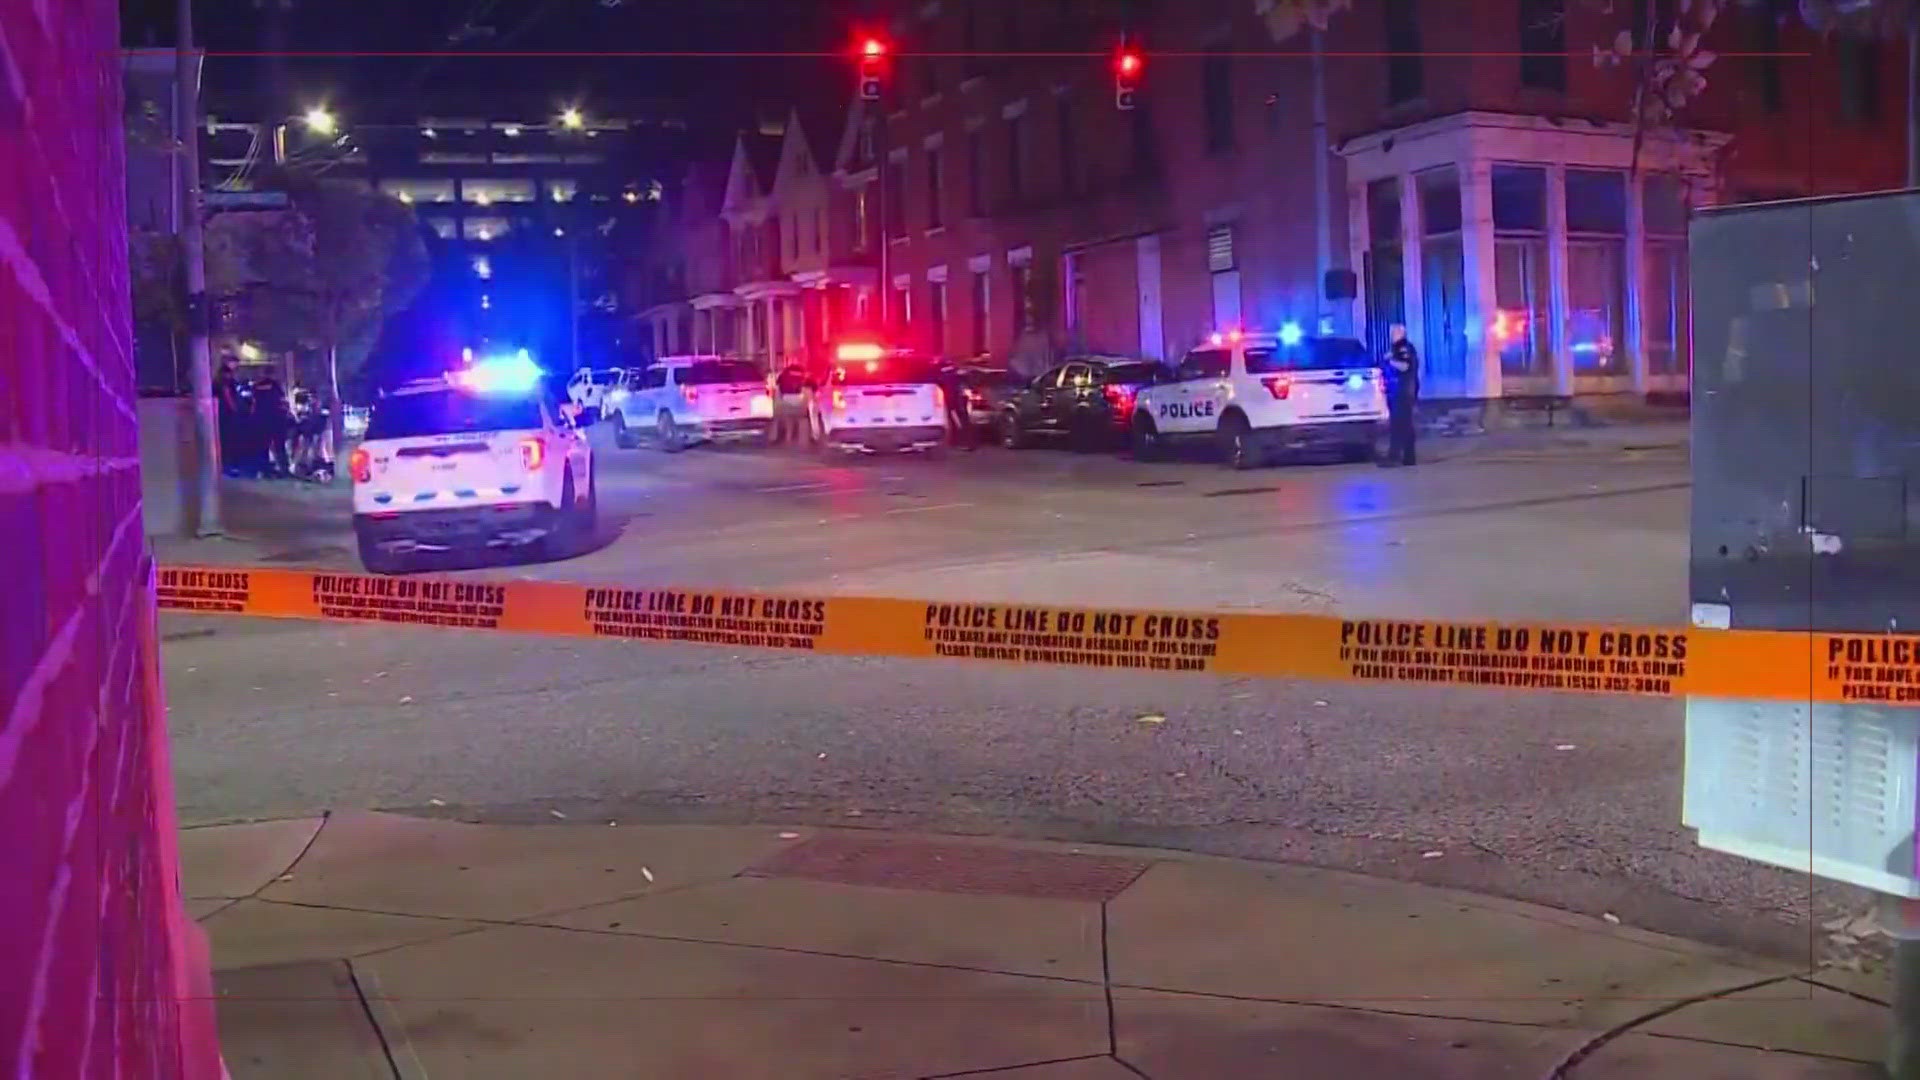 Five people were shot, including three fatally, near the University of Cincinnati campus early Monday, police said.